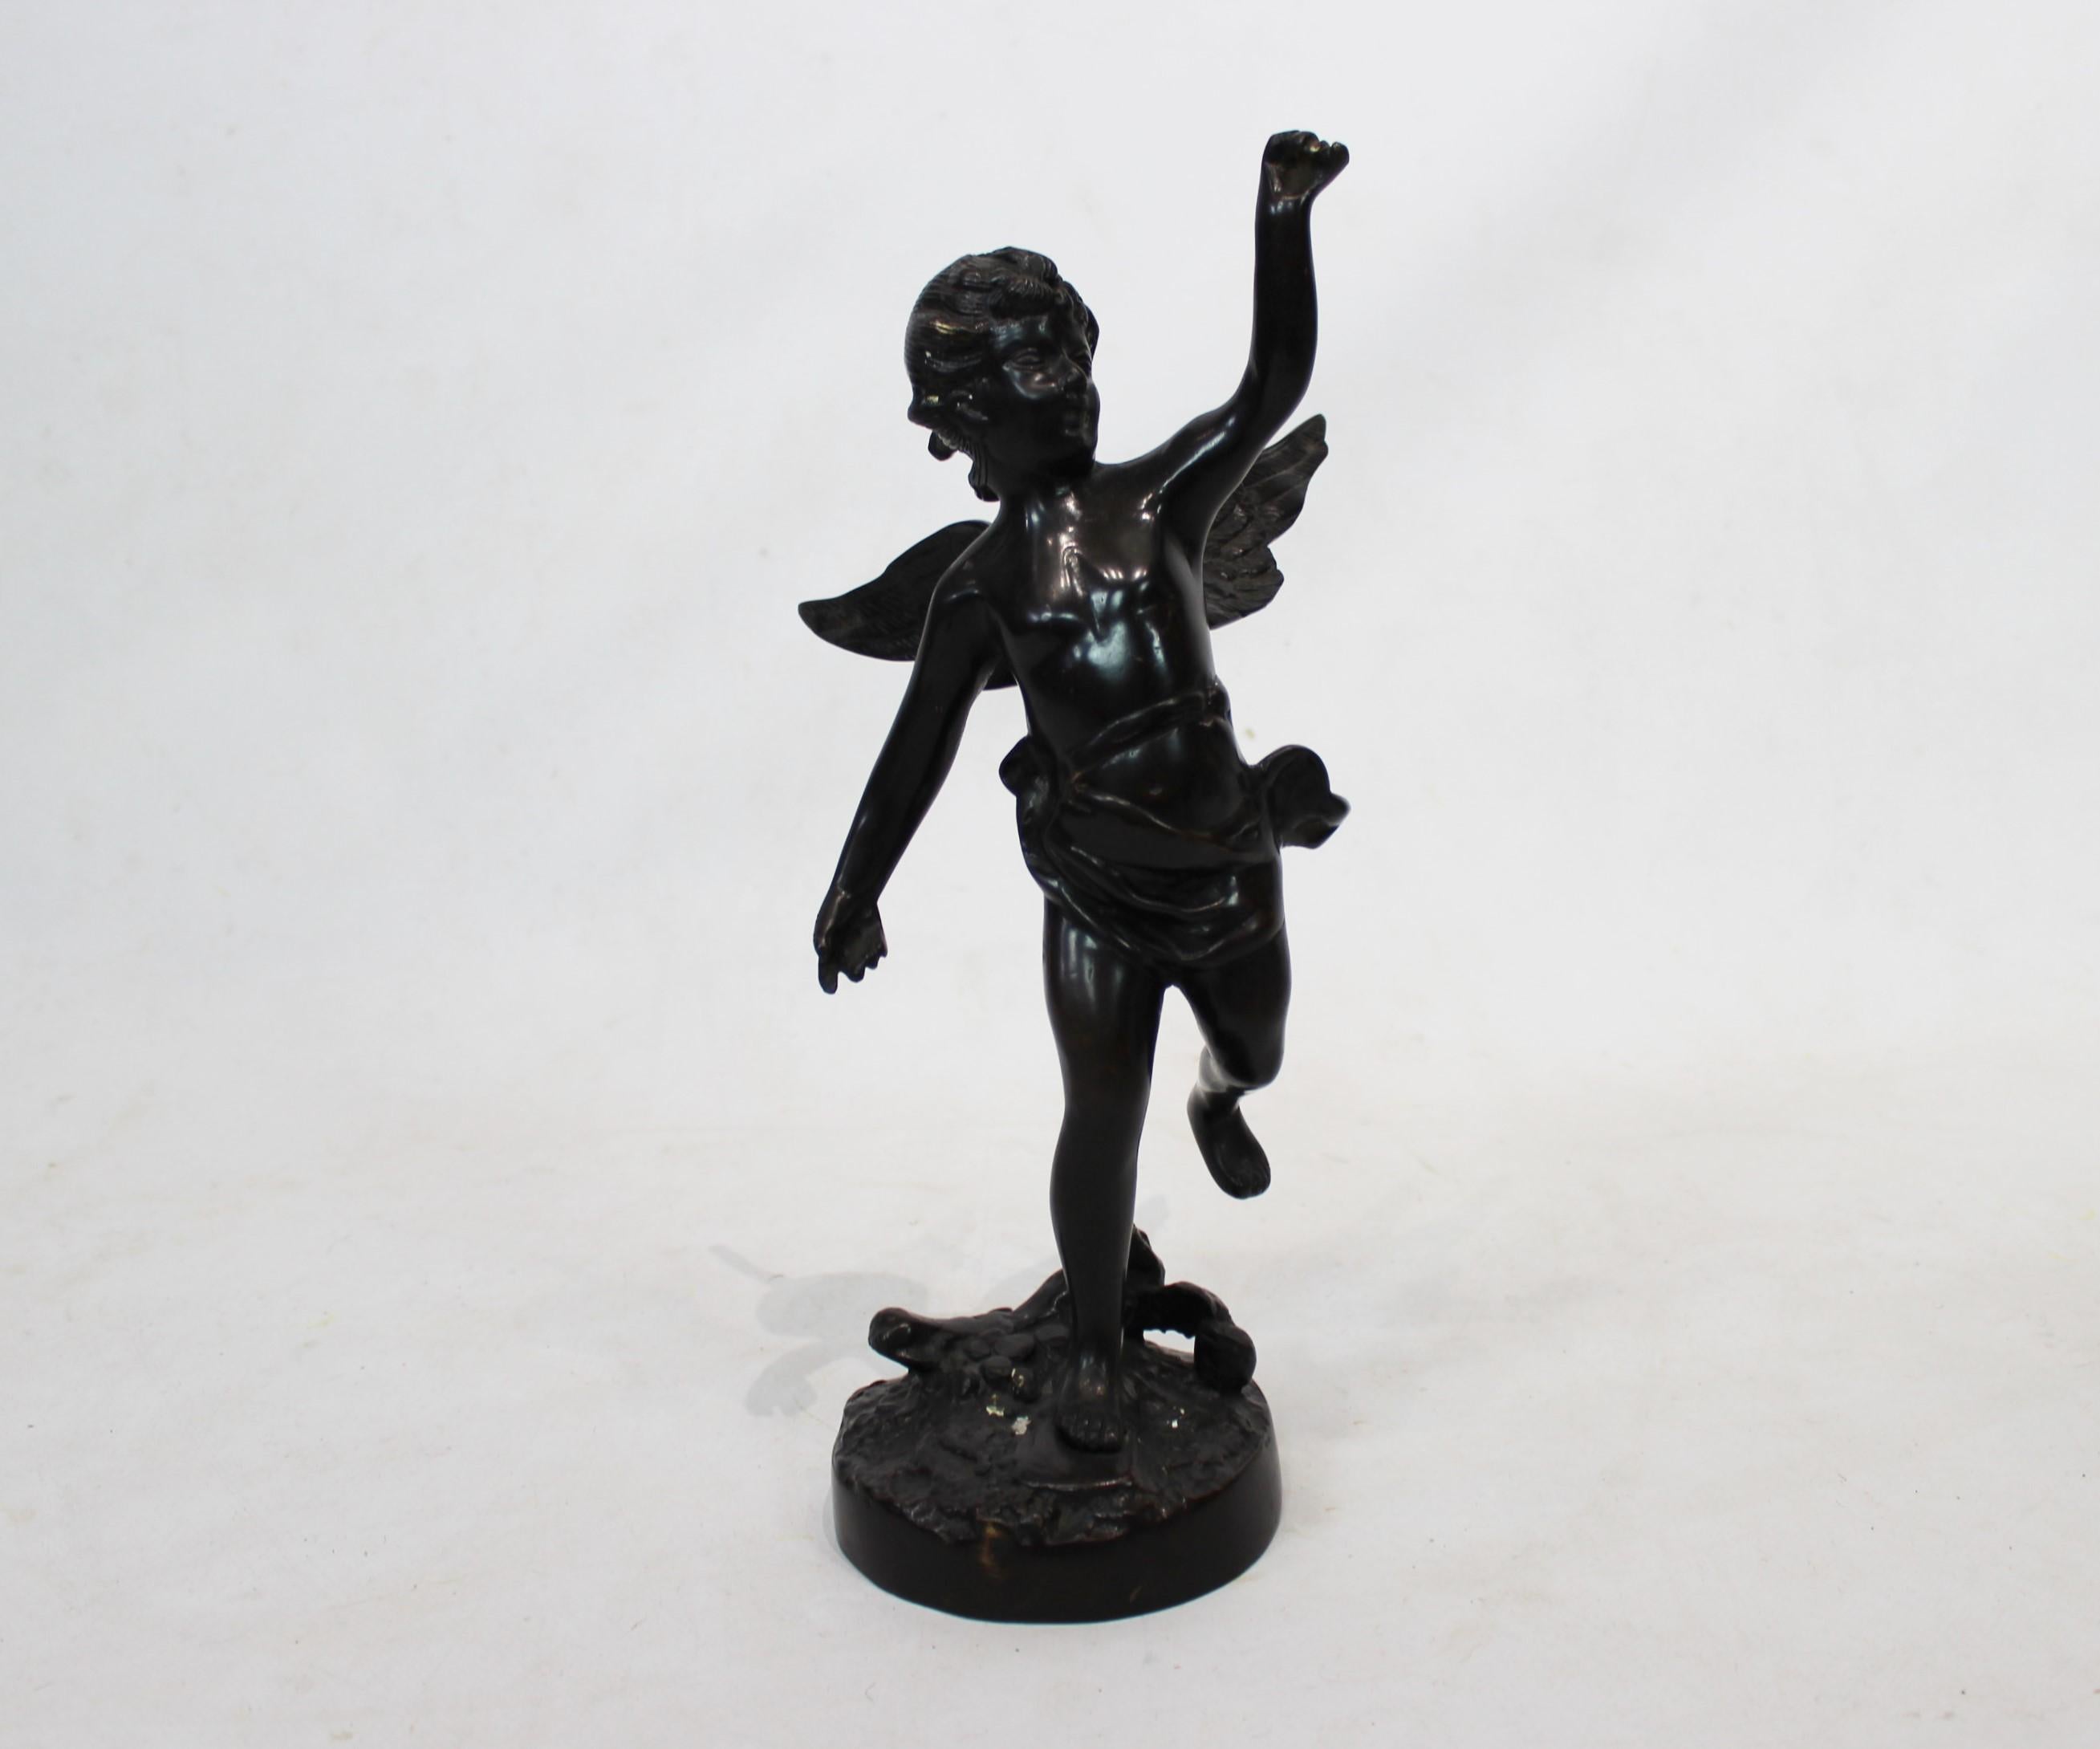 The Italian sculpture from the 1930s, crafted in patinated bronze, captures the ethereal beauty and grace of an angelic motif. Characterized by exquisite craftsmanship and meticulous attention to detail, this sculpture exemplifies the artistic